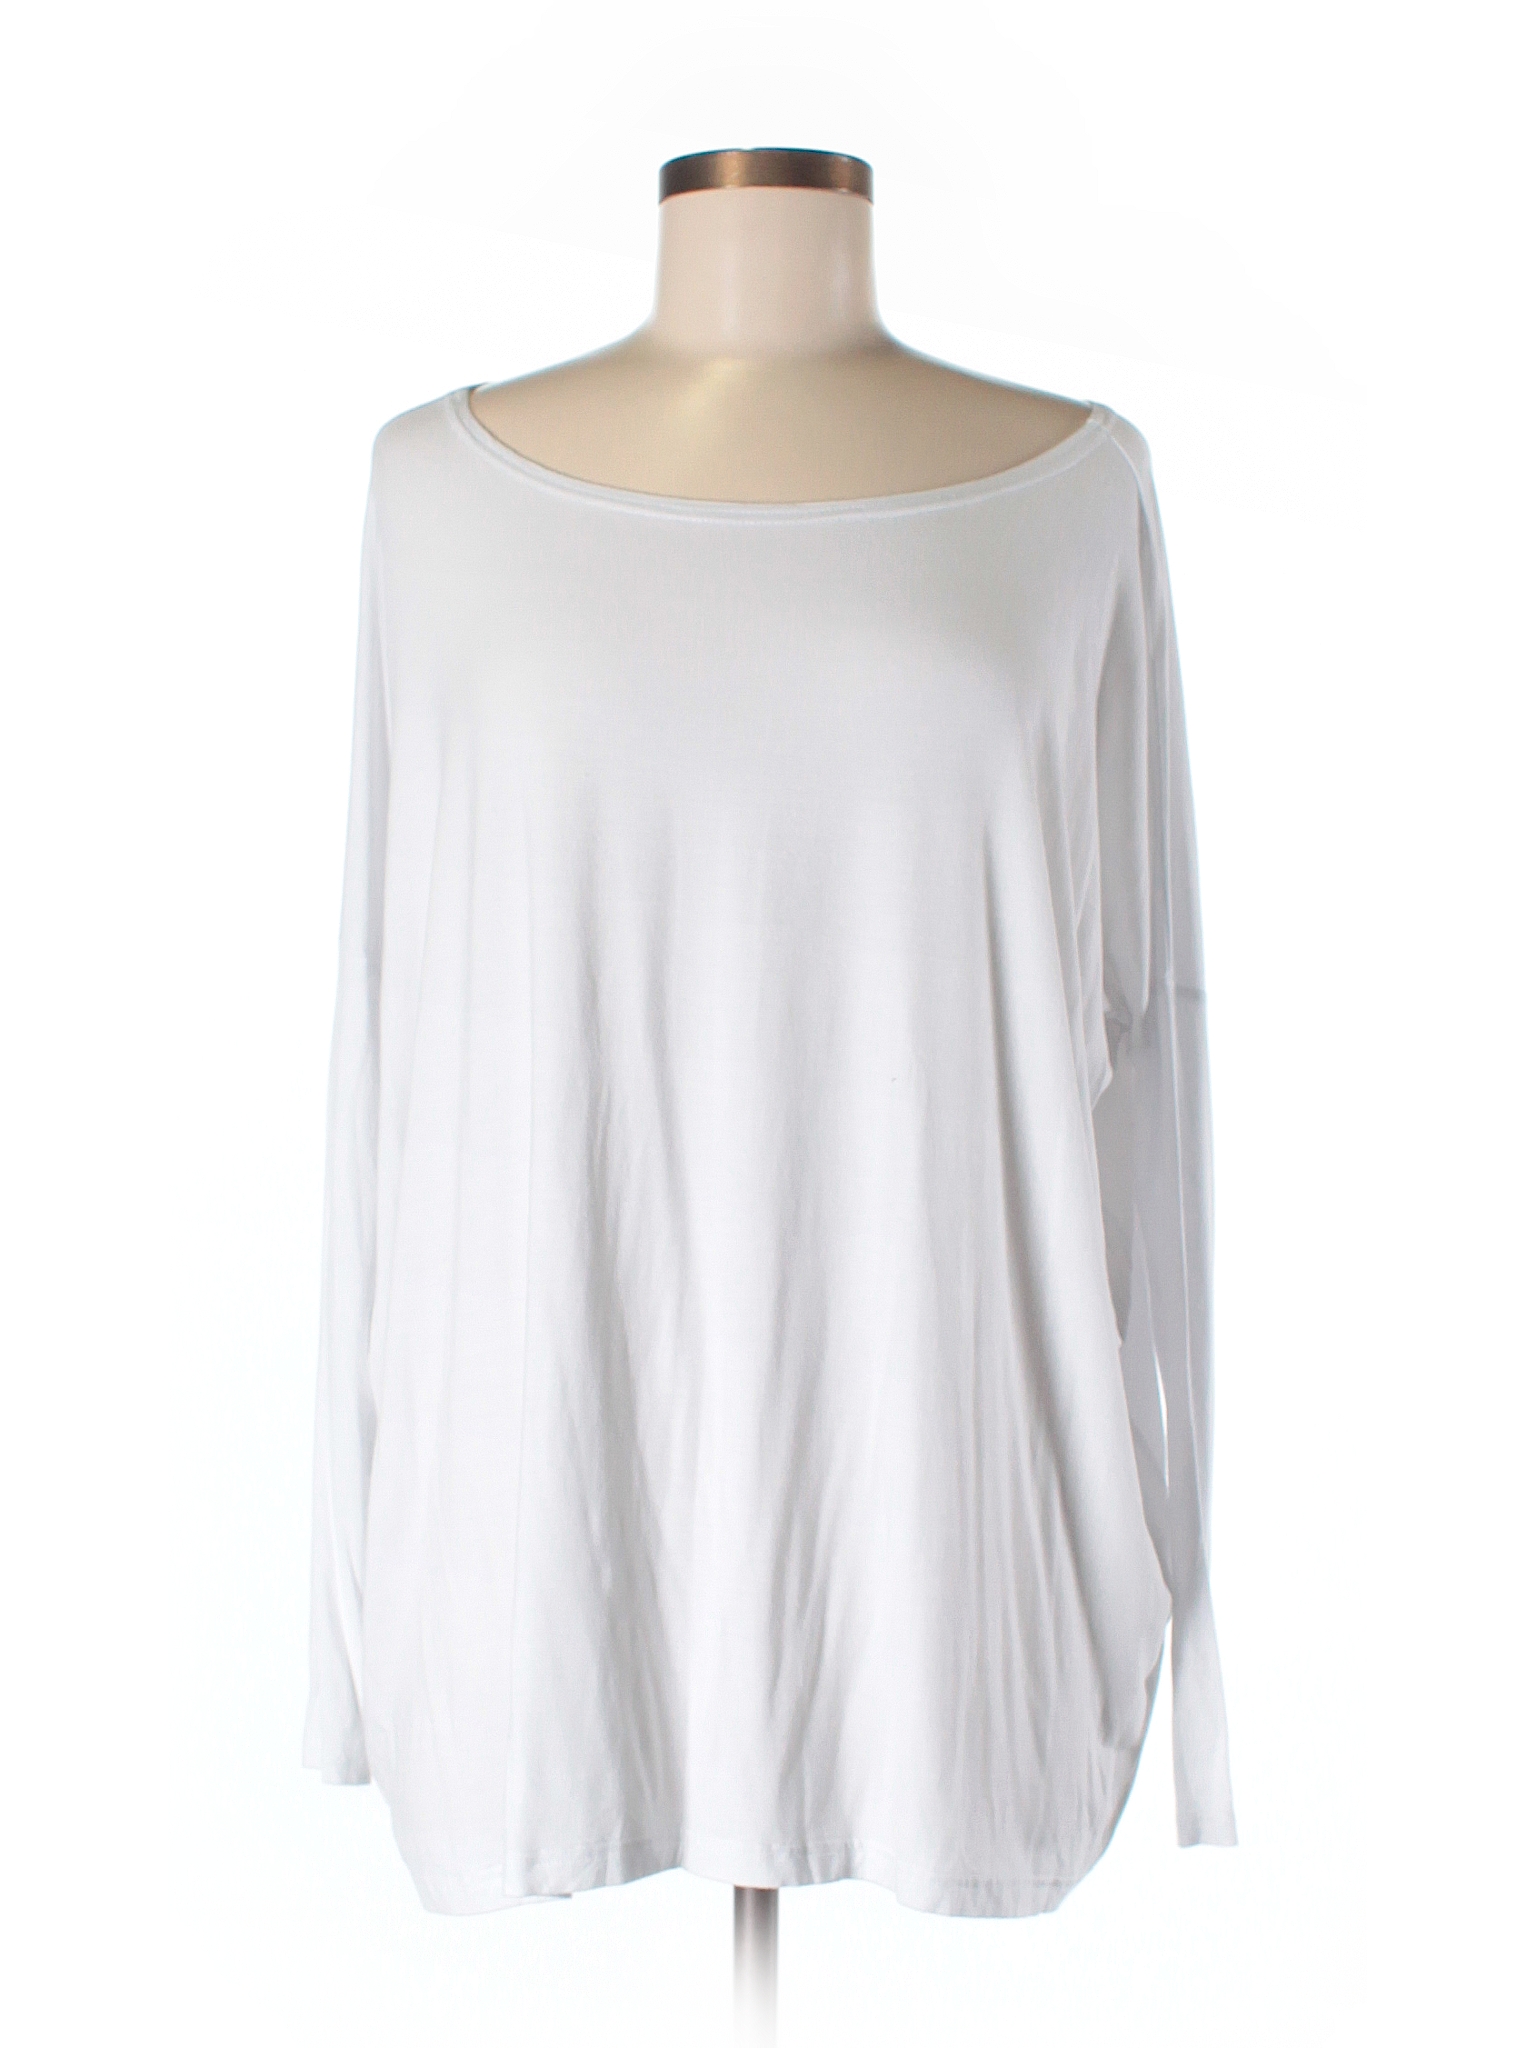 Piko 1988 Solid White Long Sleeve T-Shirt Size M - 66% off | thredUP